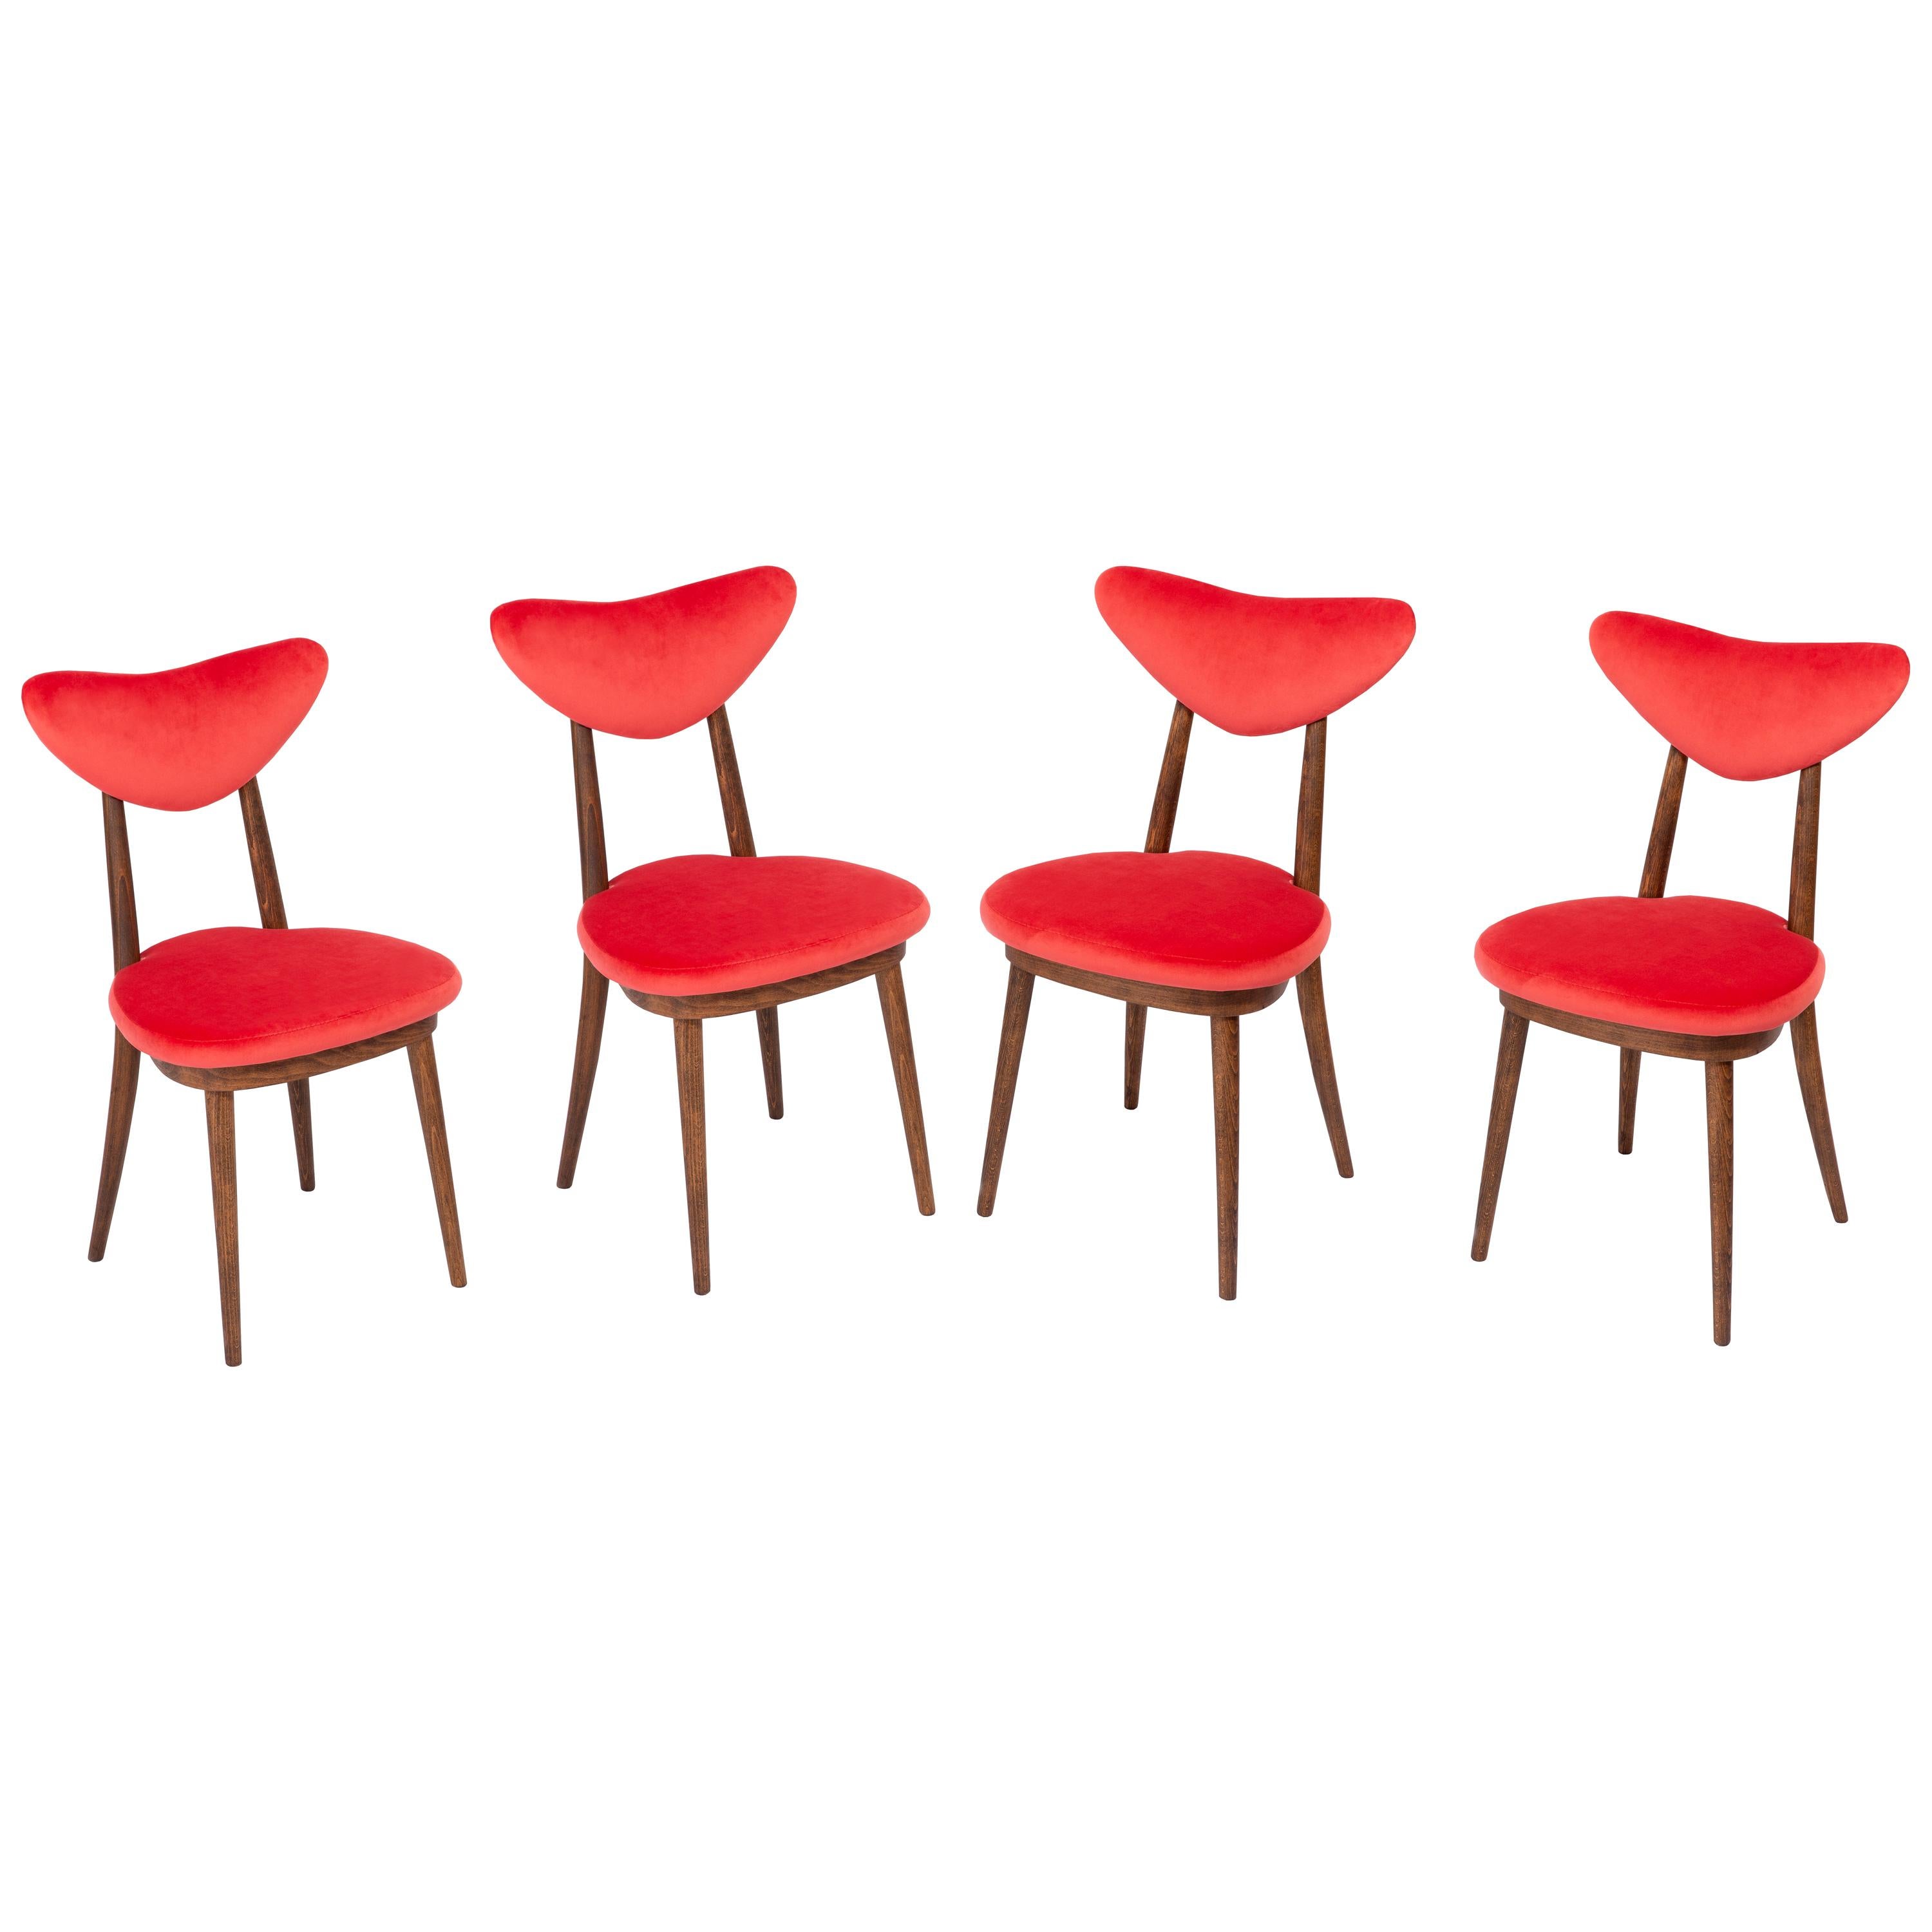 Set of Four Red Heart Chairs, Poland, 1960s